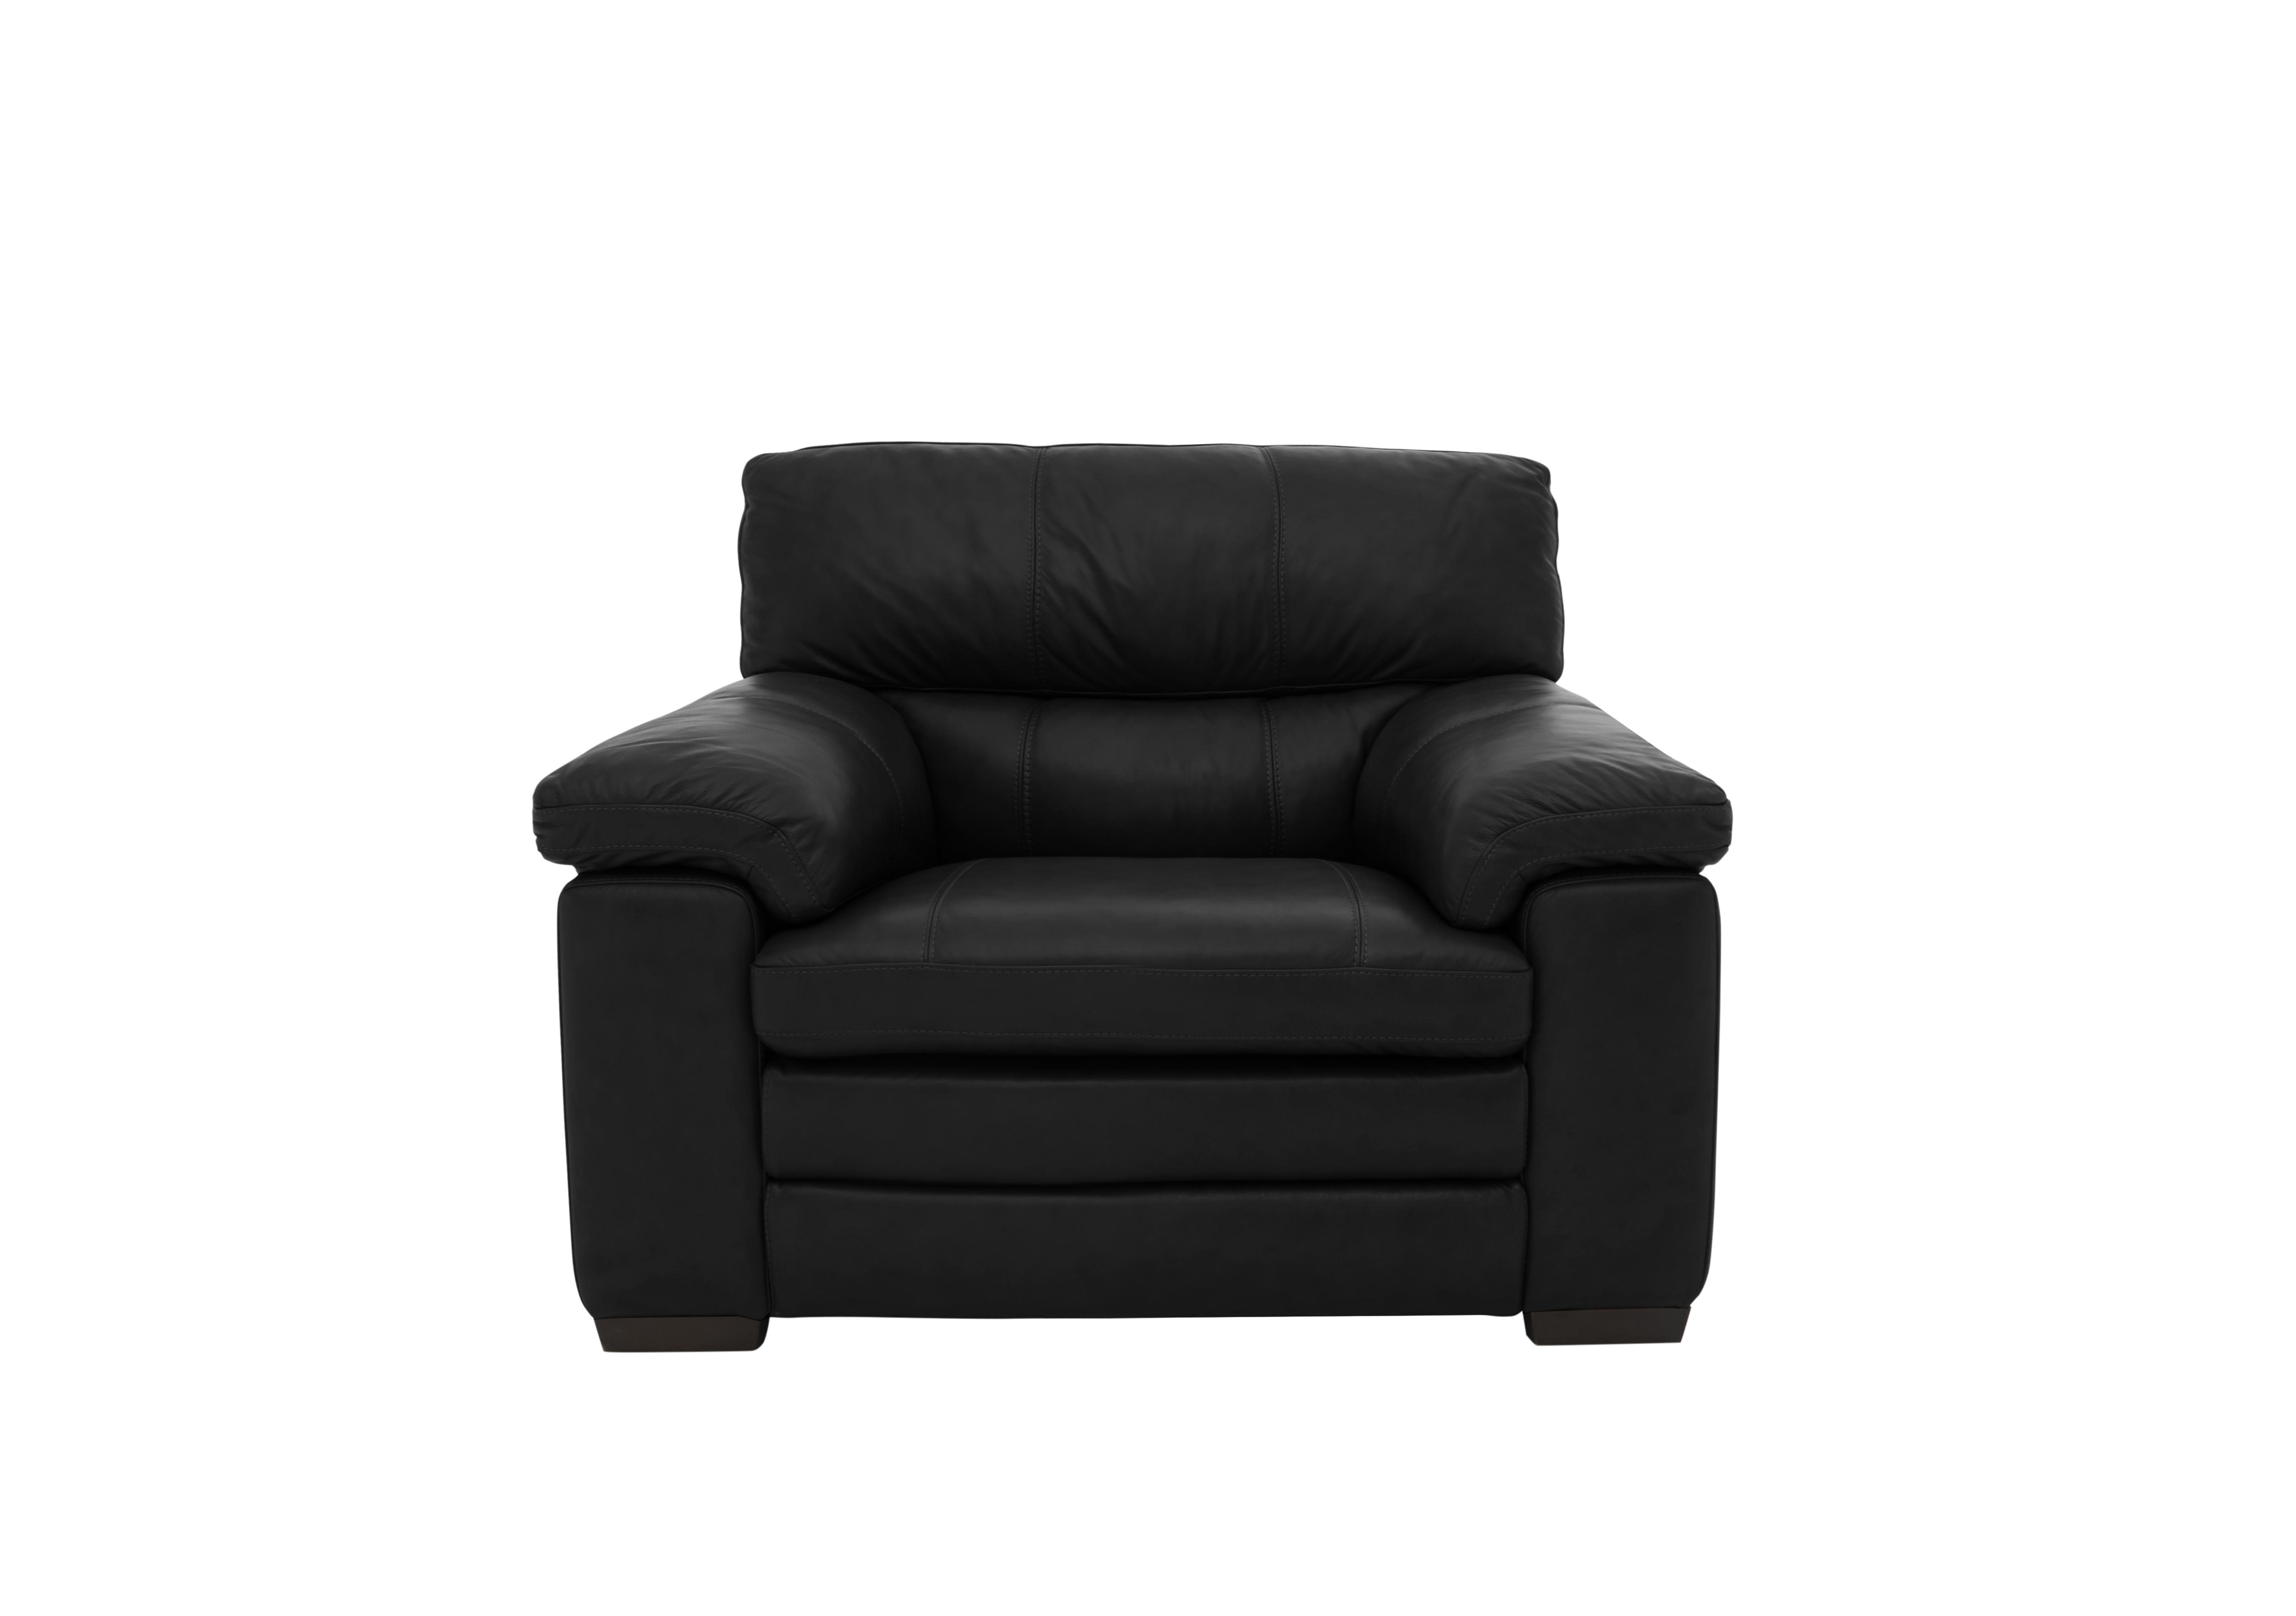 Cozee Leather Armchair in Bv-3500 Classic Black on Furniture Village